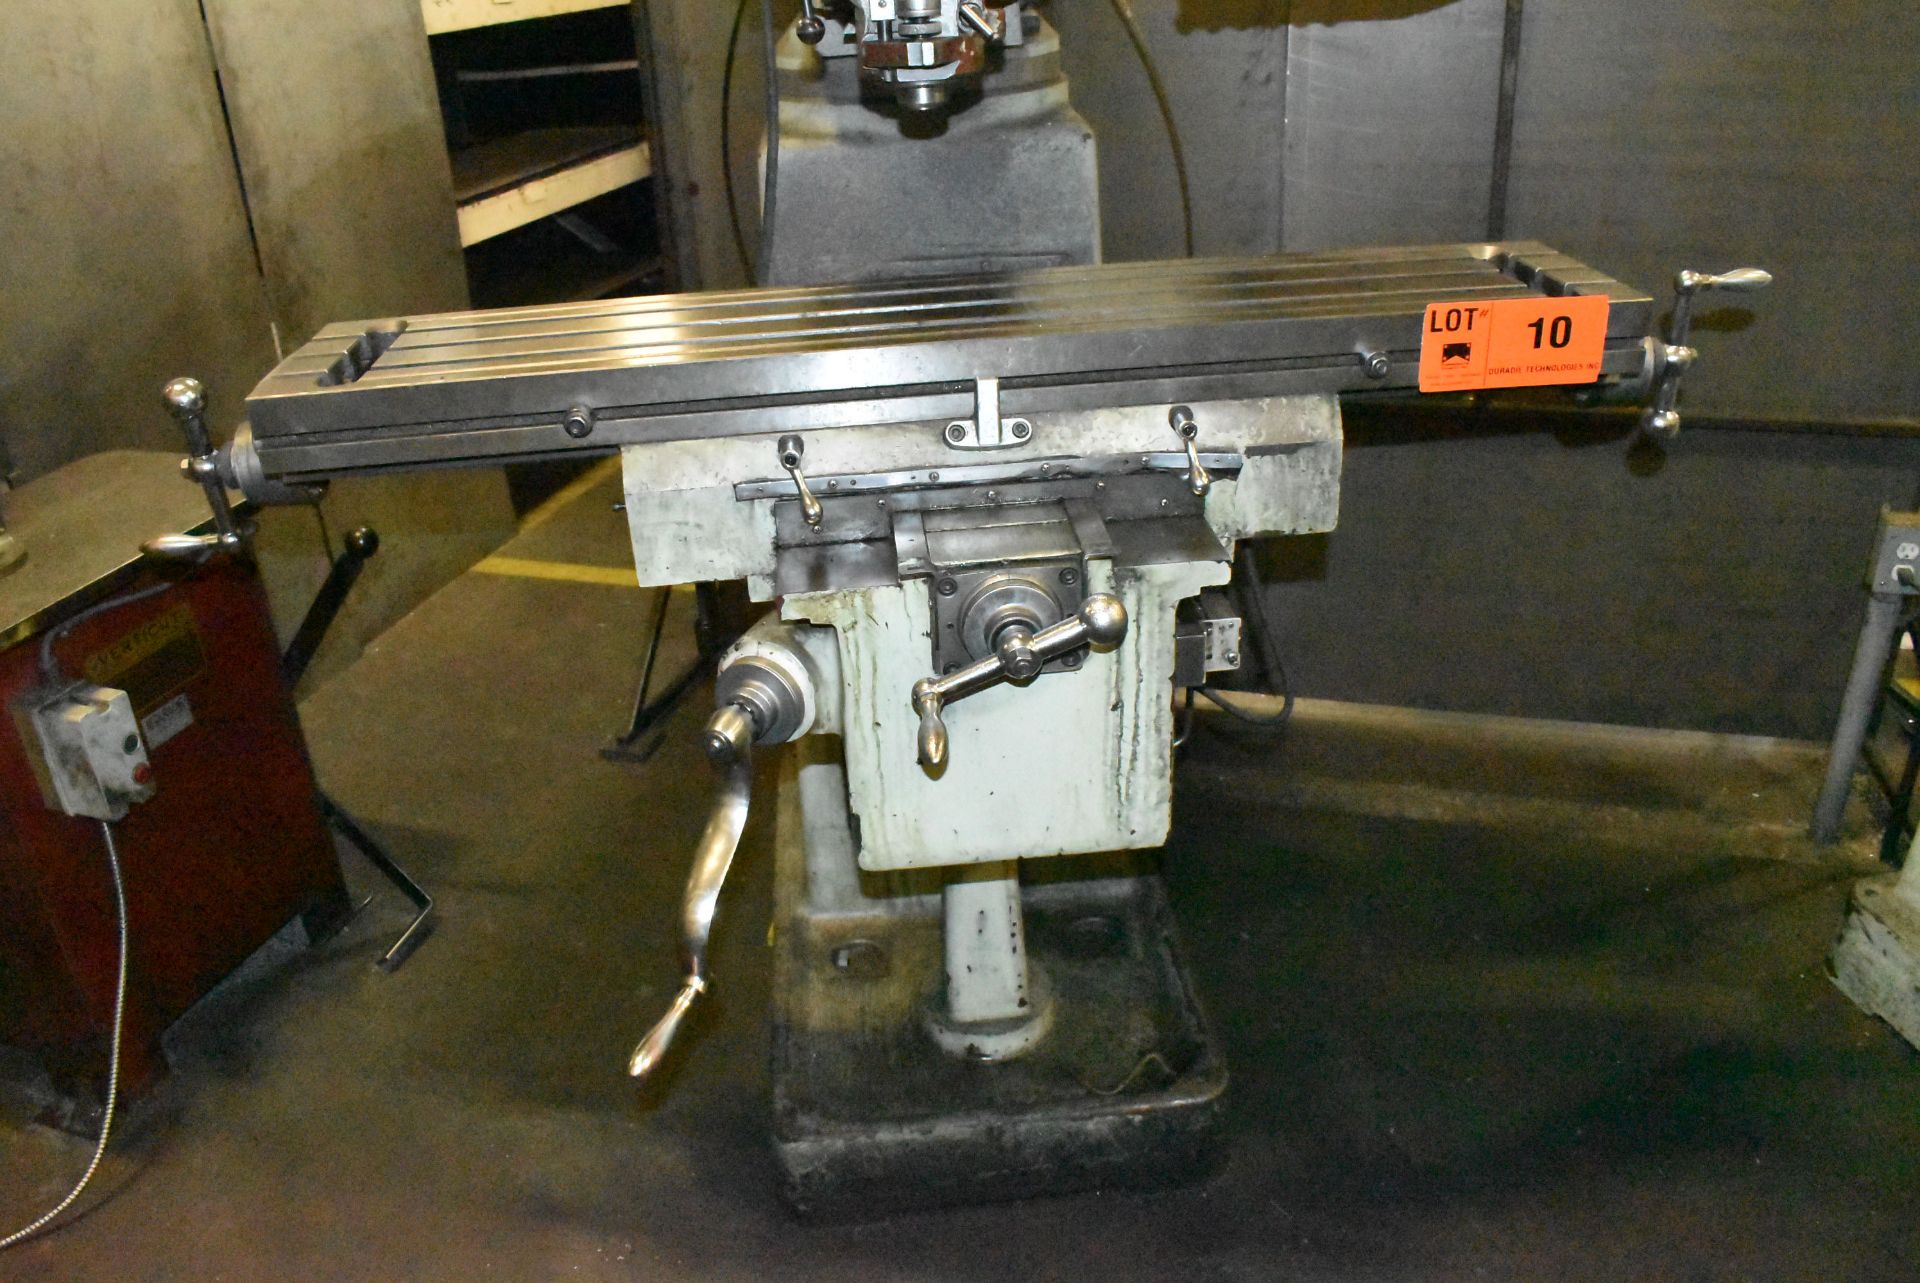 FIRST VERTICAL TURRET MILL WITH 10" X 50" T-SLOT TABLE, R8 SPINDLE TAPER, SPEEDS TO 4500 RPM, - Image 6 of 7